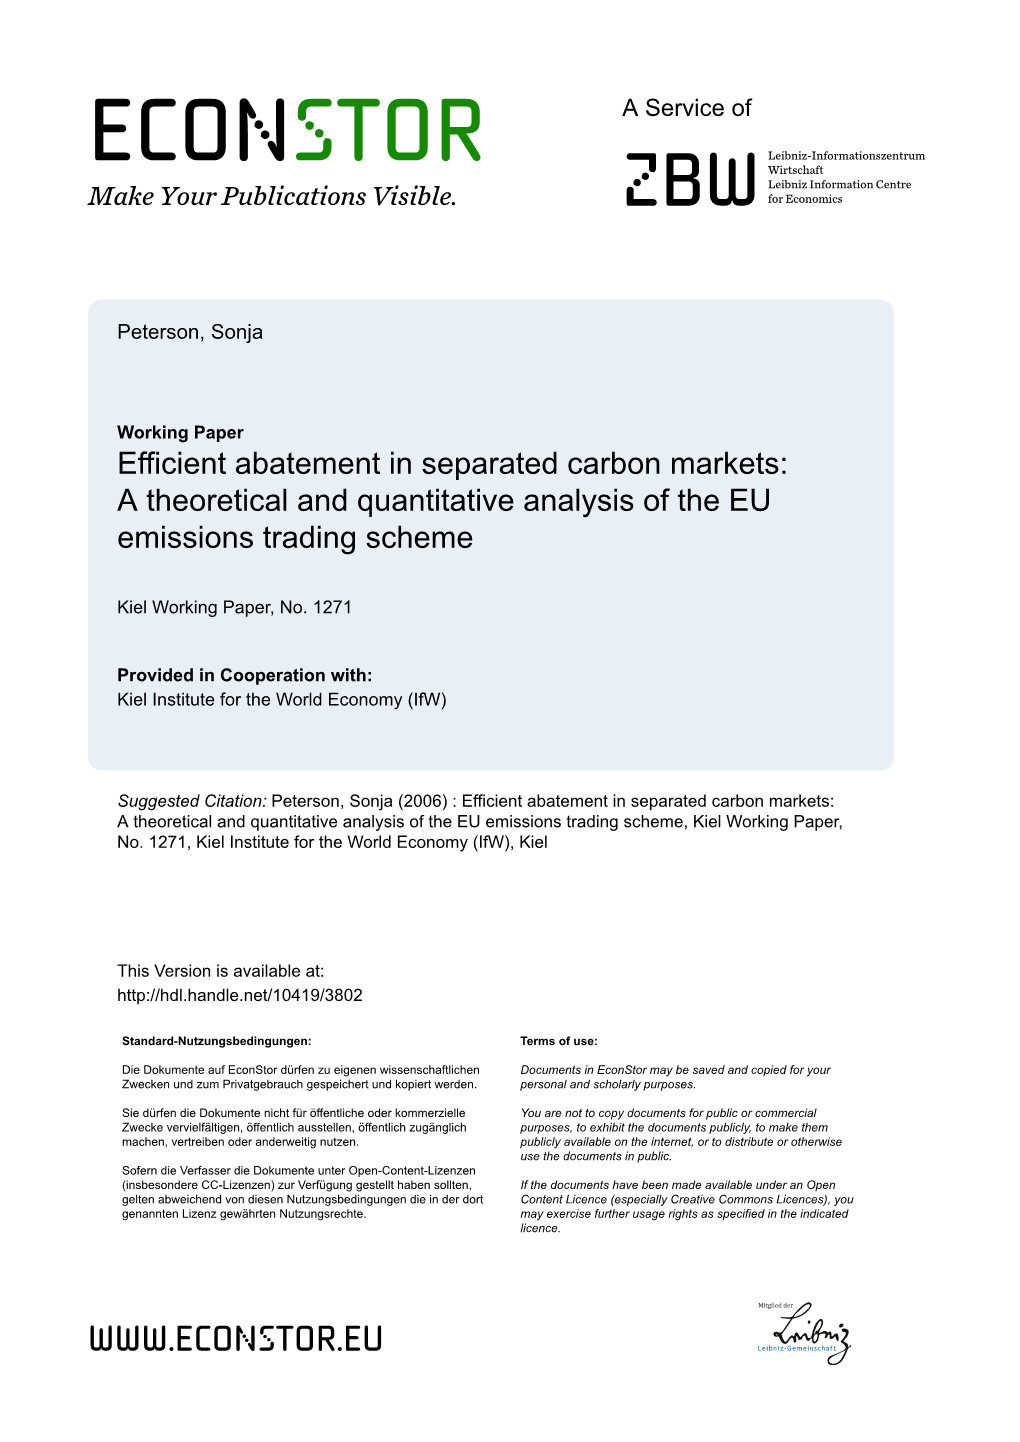 A Theoretical and Quantitative Analysis of the EU Emissions Trading Scheme